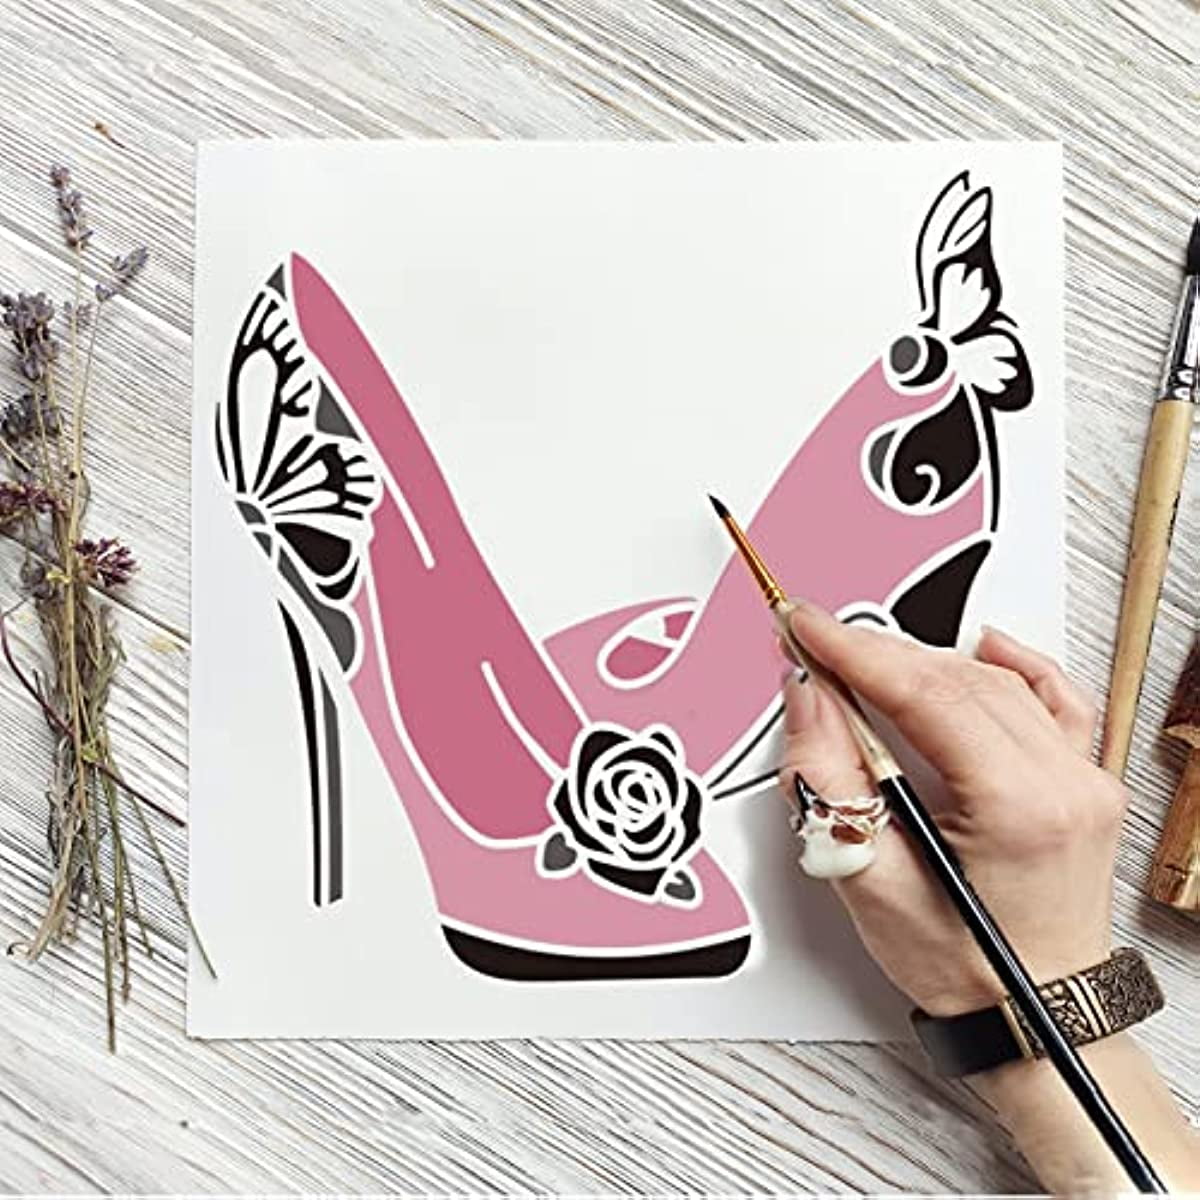  High Heel Shoe Stencil, 4.5 x 4.5 inch (S) - Decorative Flower  Stiletto Platform Shoes Stencils for Painting Template : Arts, Crafts &  Sewing